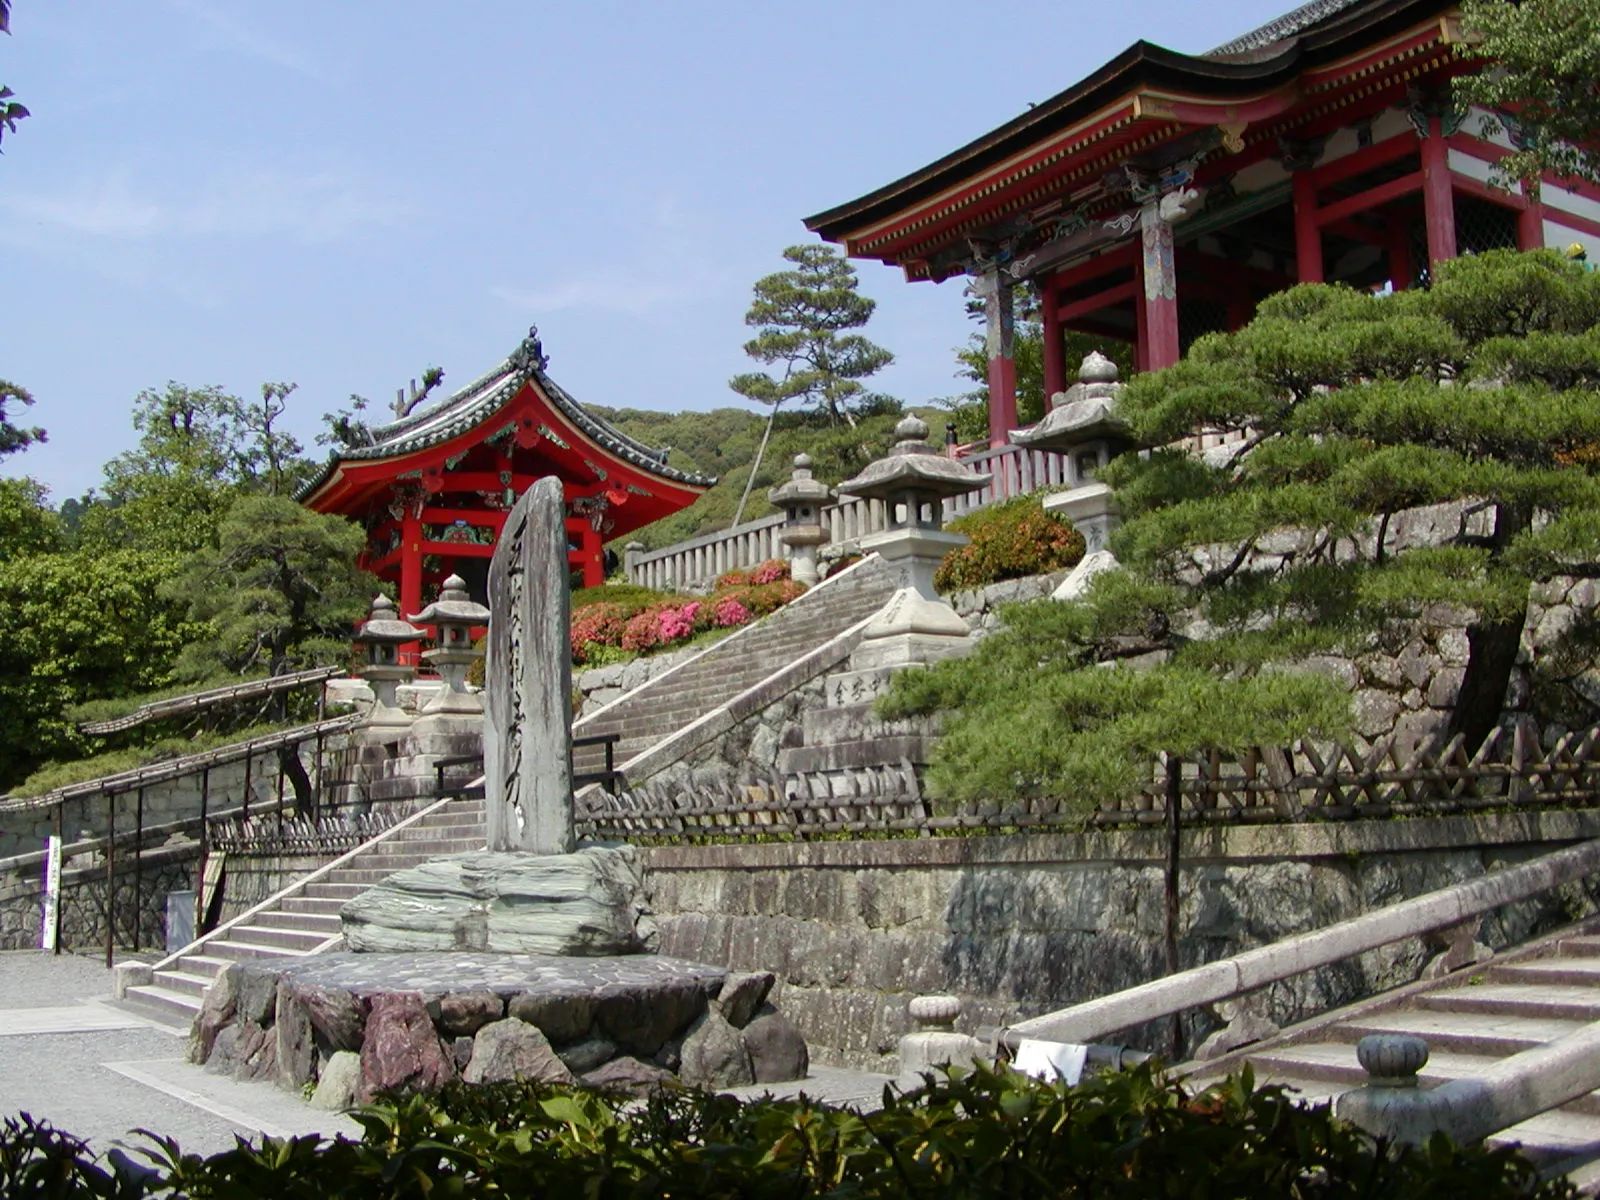 Photo of The West Gate of Kiyomizu-dera temple in Kyoto, Japan